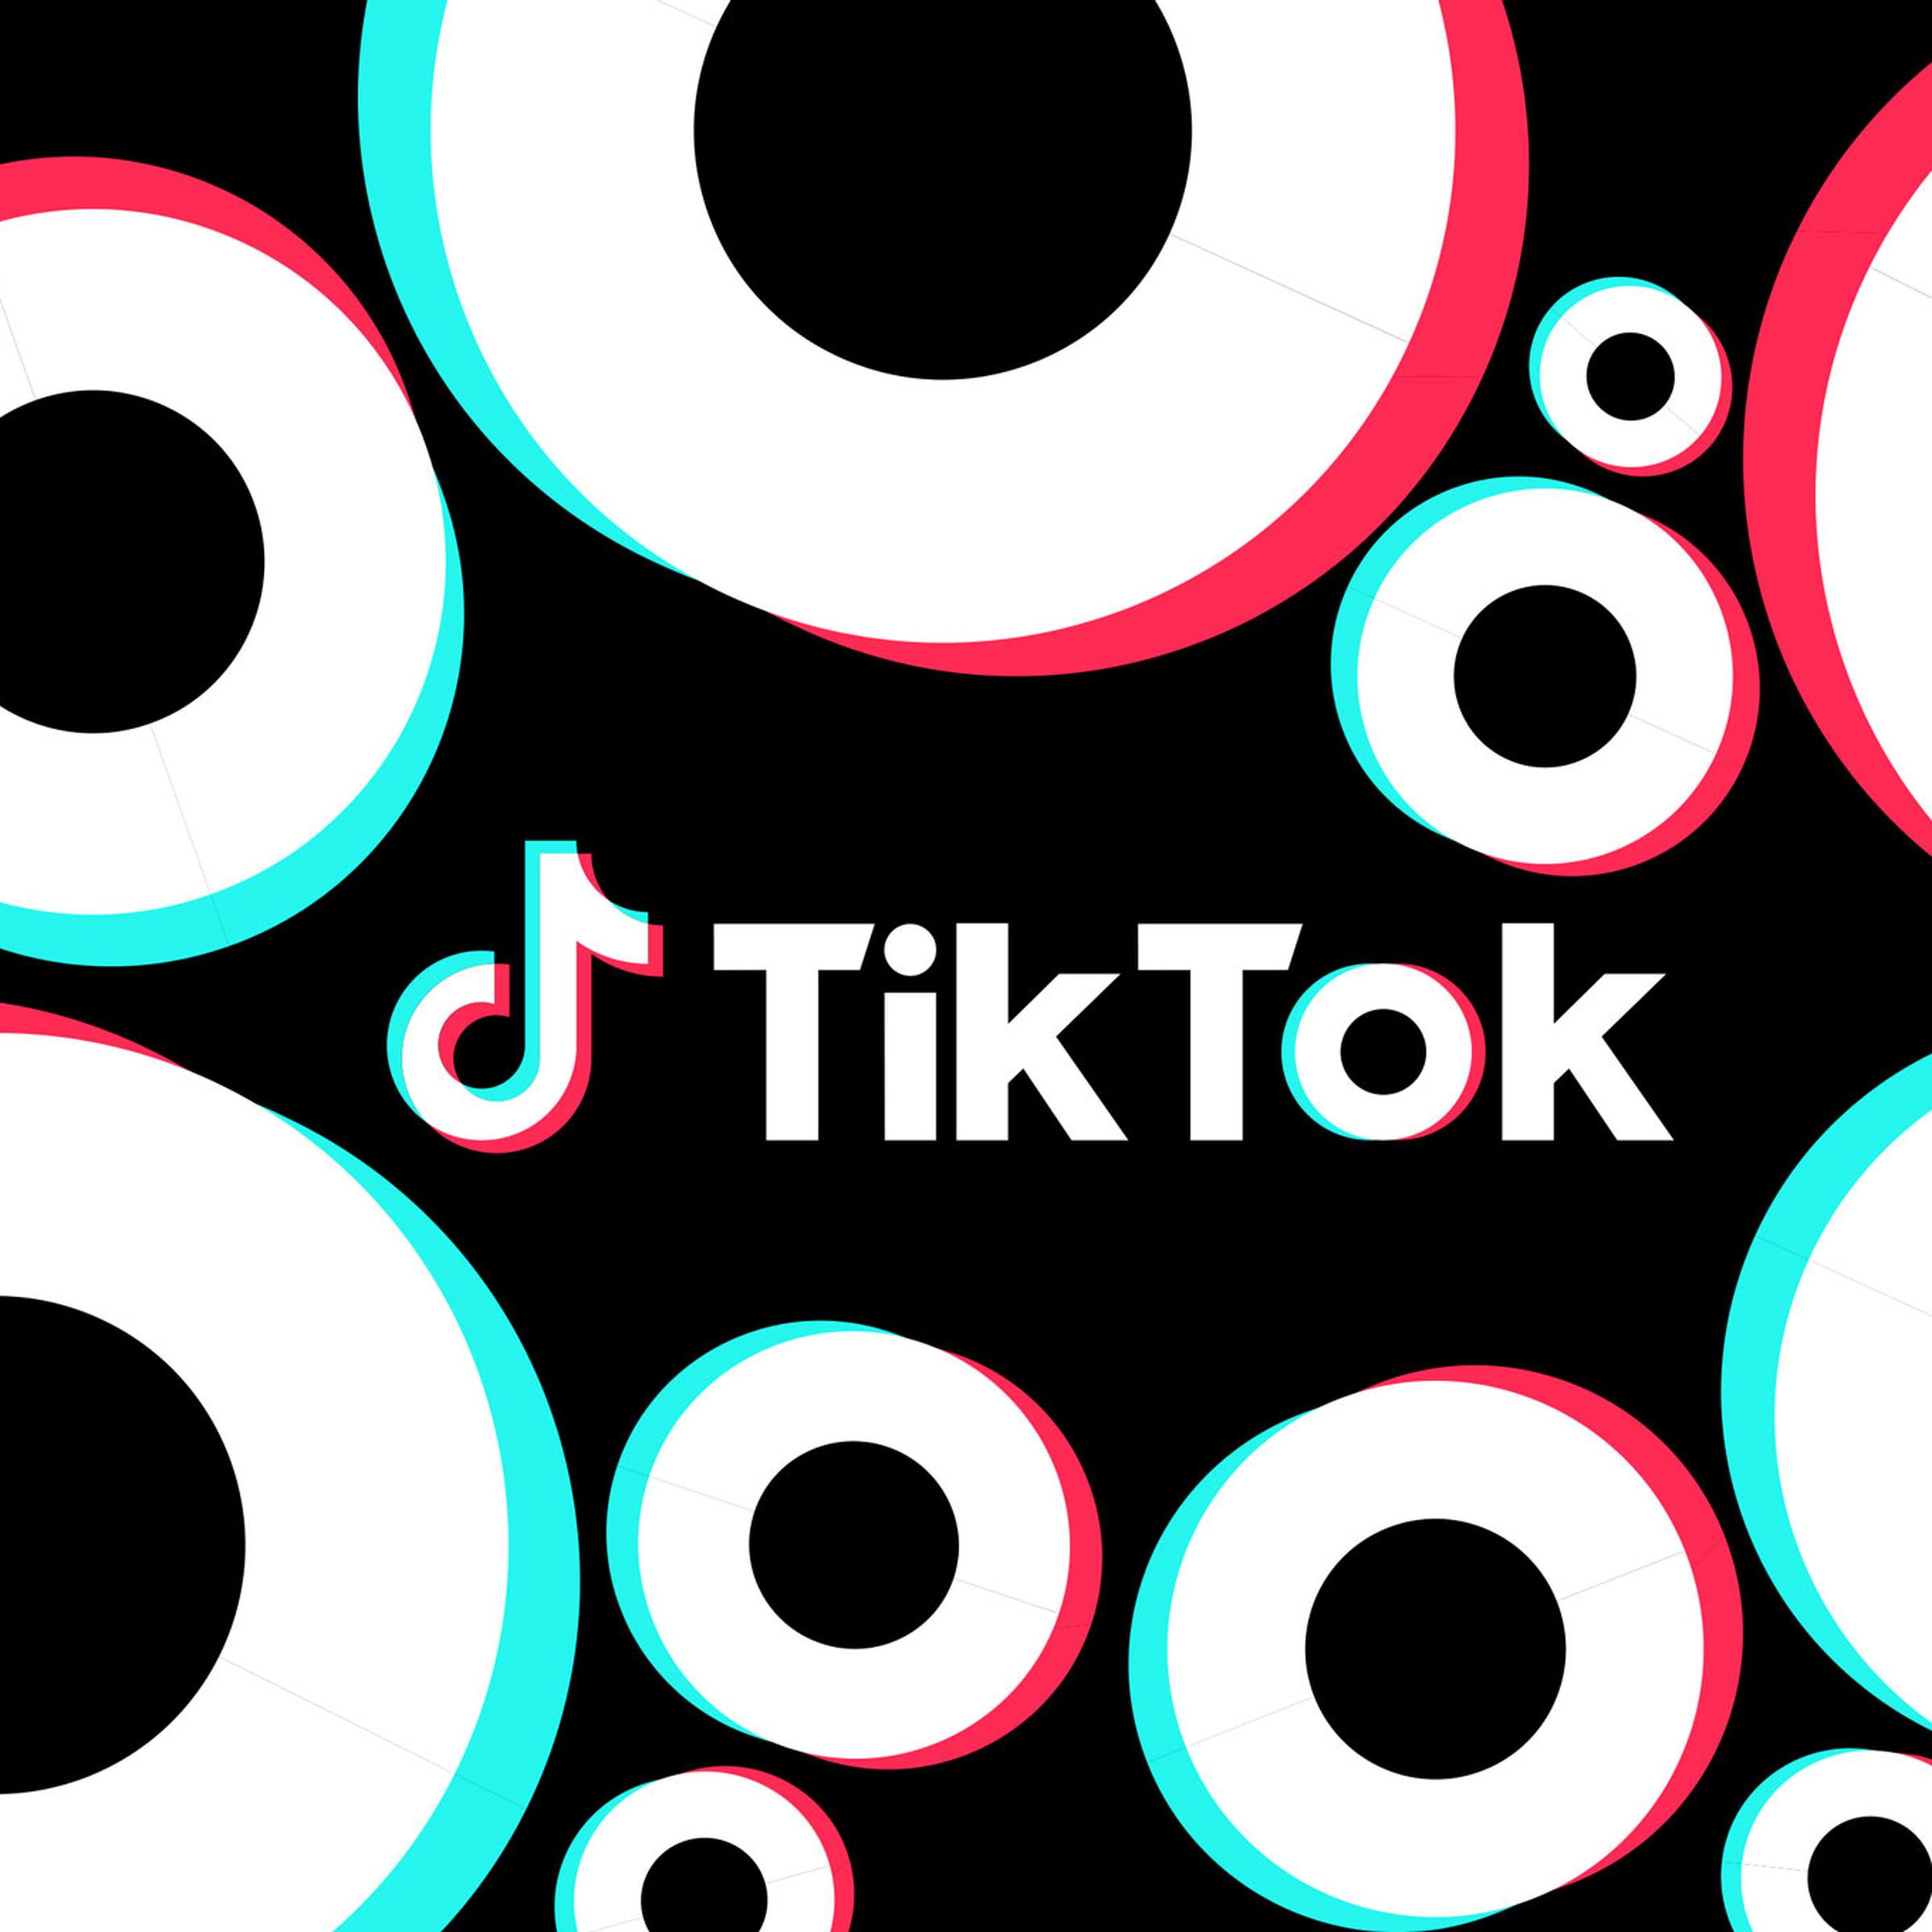 The TikTok logo on a black background with repeating geometric shapes